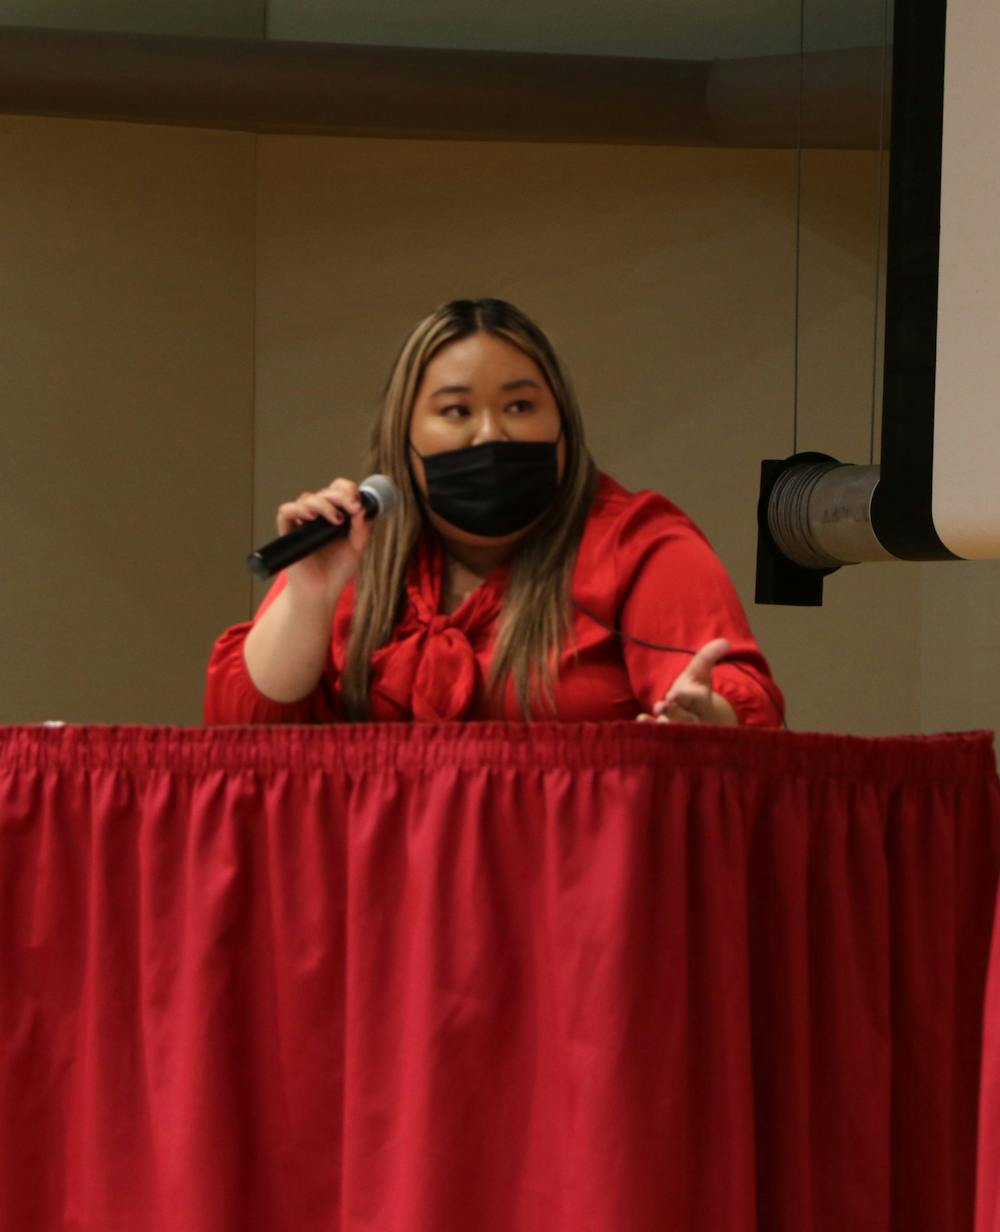 <p>Current Ball State Student Government Association (SGA) President Tina Nguyen speaks about her platforms at the SGA presidential debate in John J. Pruis Hall Feb.15. Nguyen is re-running as president with Monet Lindstrand running as her vice president. <strong>Hannah Amos, DN</strong></p><p></p>